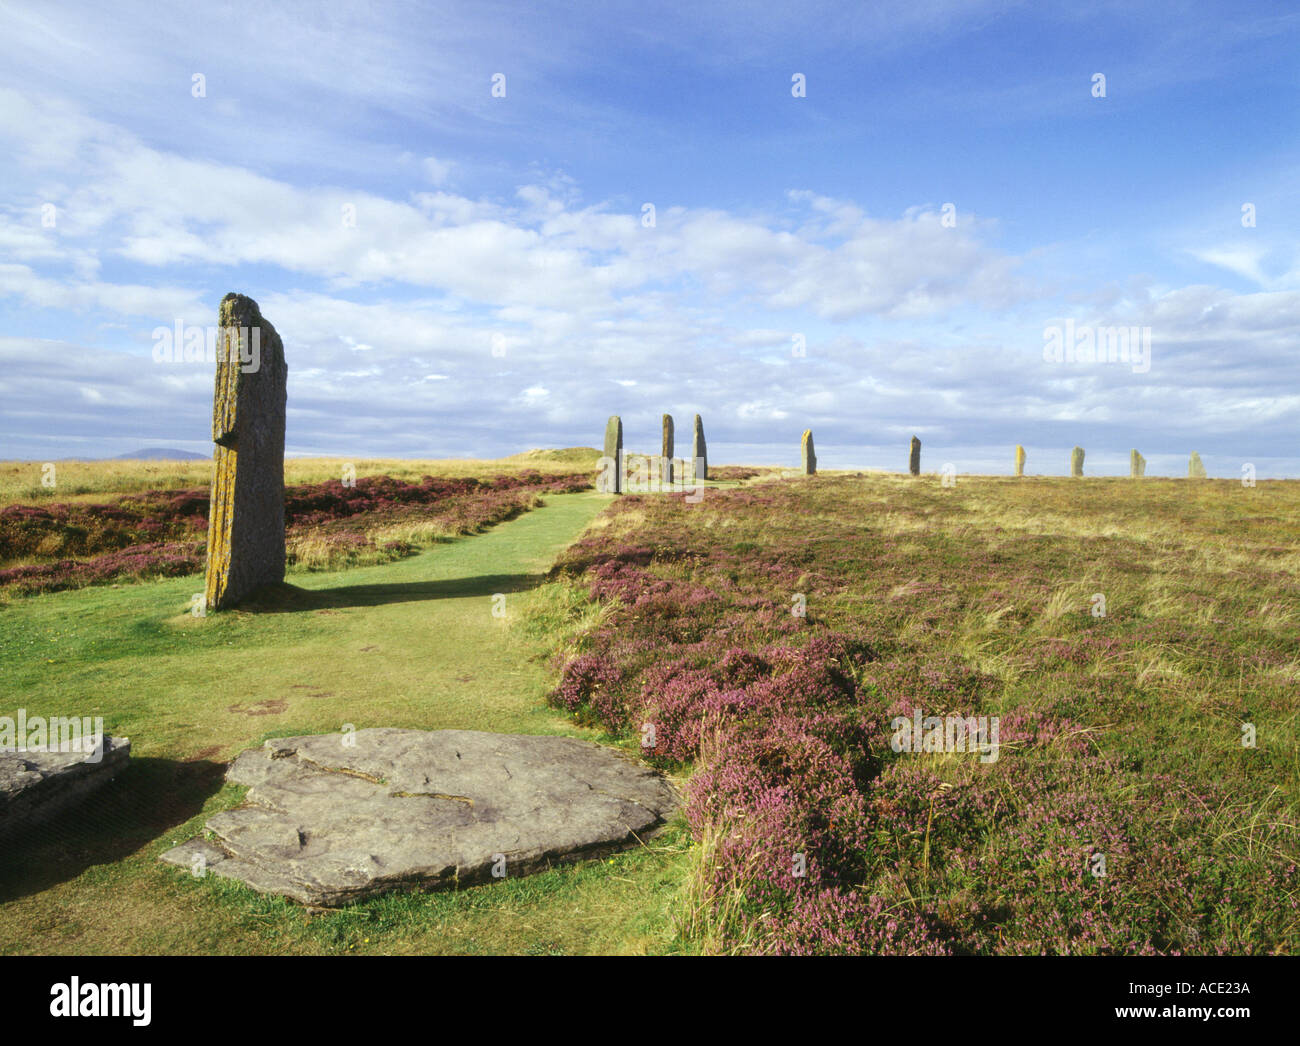 dh Neolithic standing stones RING OF BRODGAR ORKNEY Orkneys unesco world heritage sites uk bronze age era ancient site Stock Photo